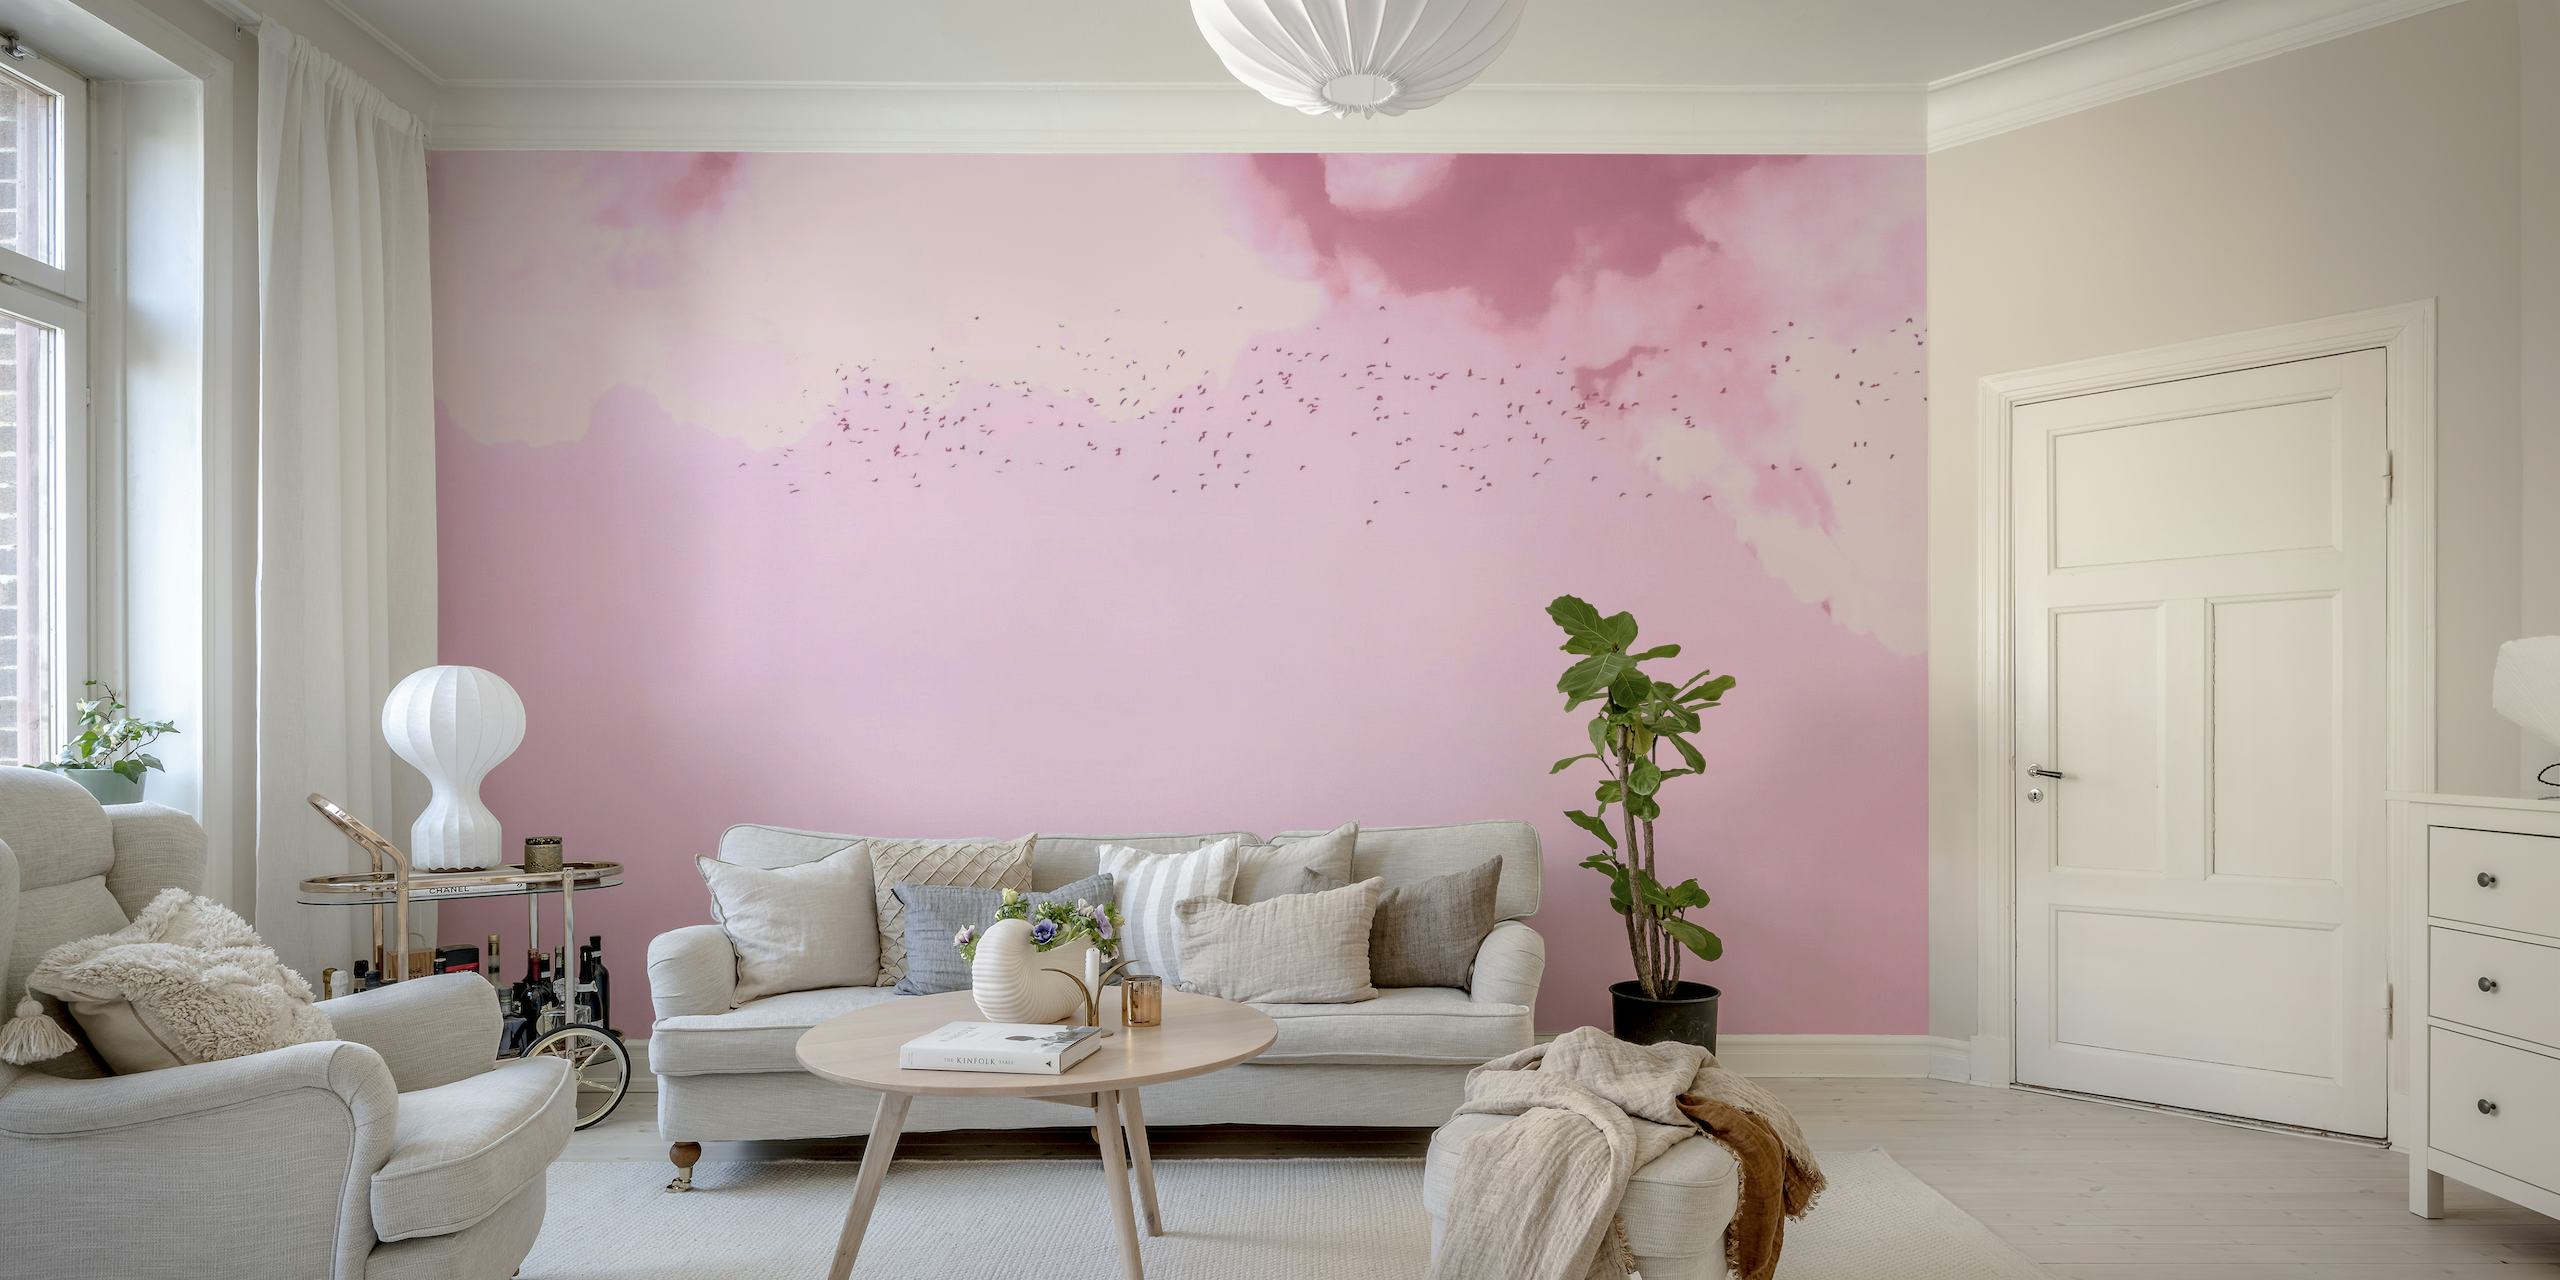 A dreamy pink and magenta wall mural depicting birds in flight among soft clouds